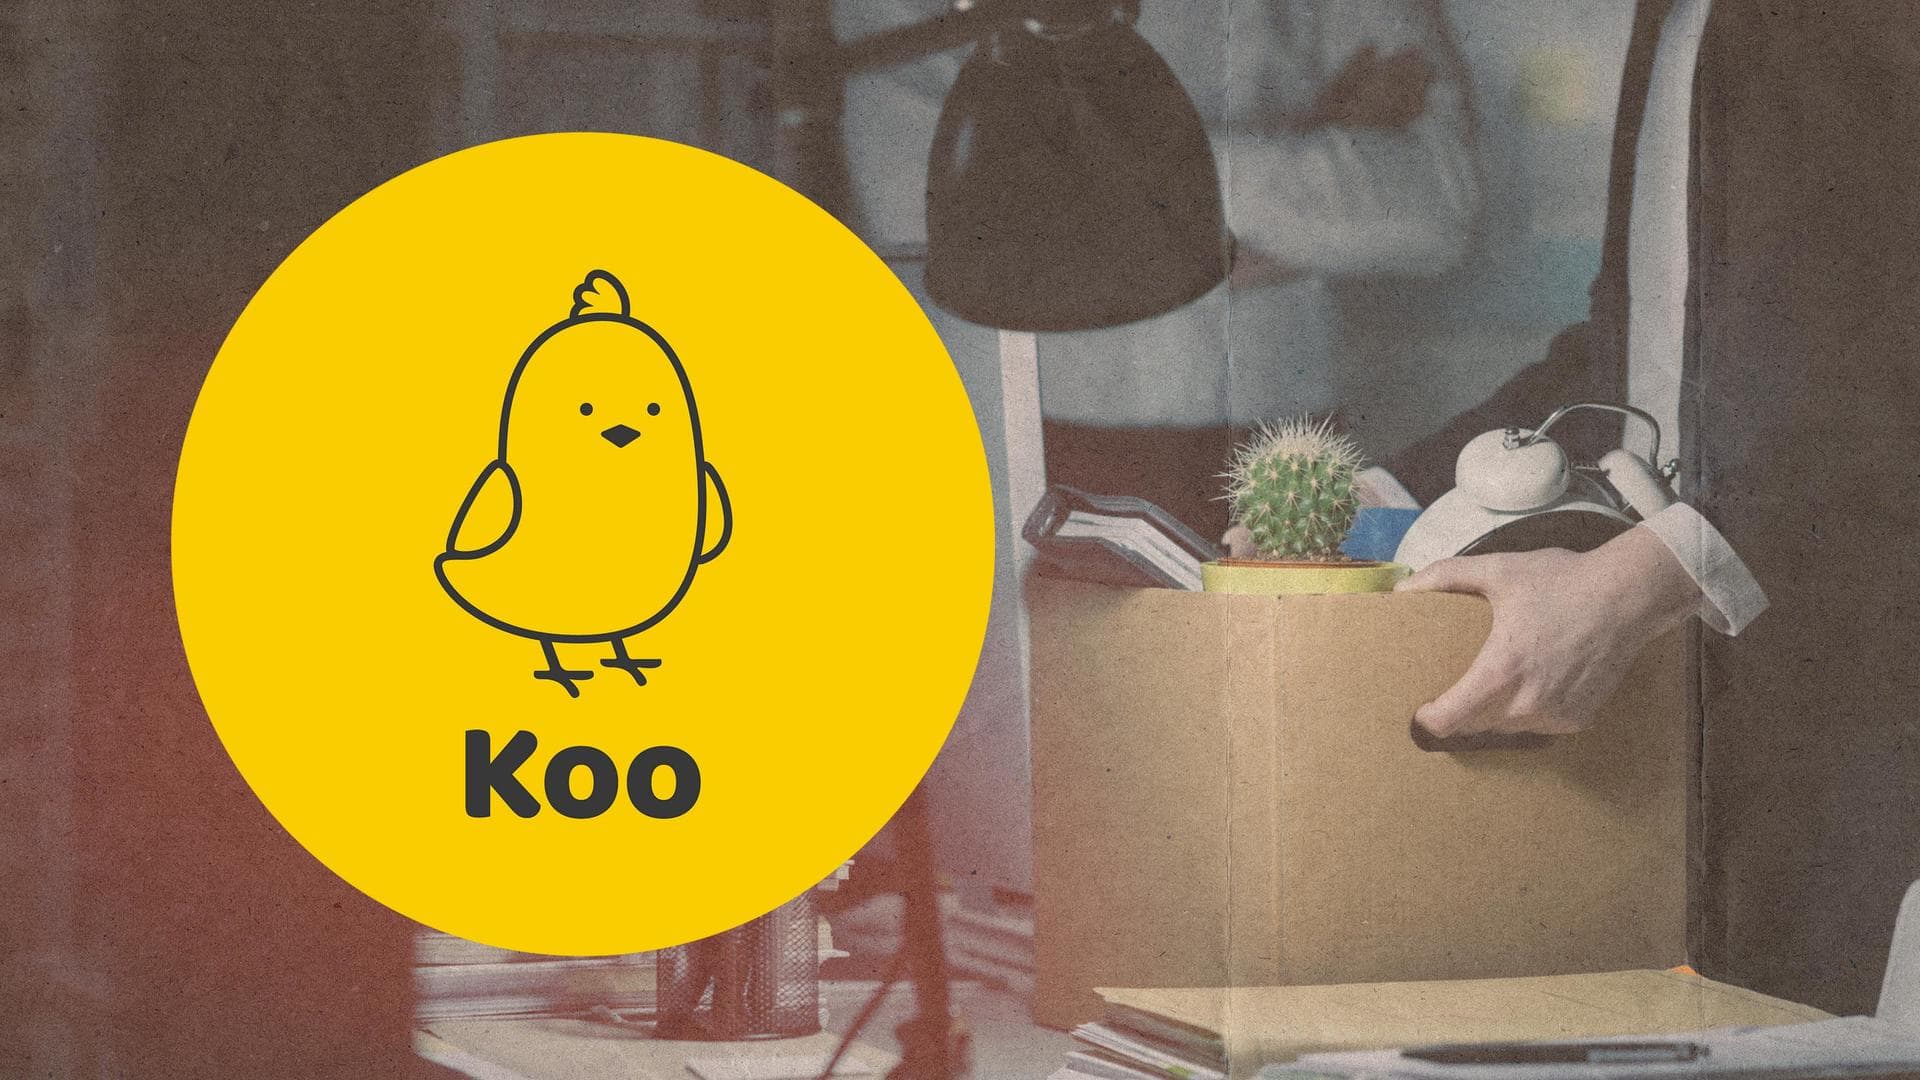 Twitter Competitor Koo Now Joins The List Of Companies That Have Let Go Of Employees.